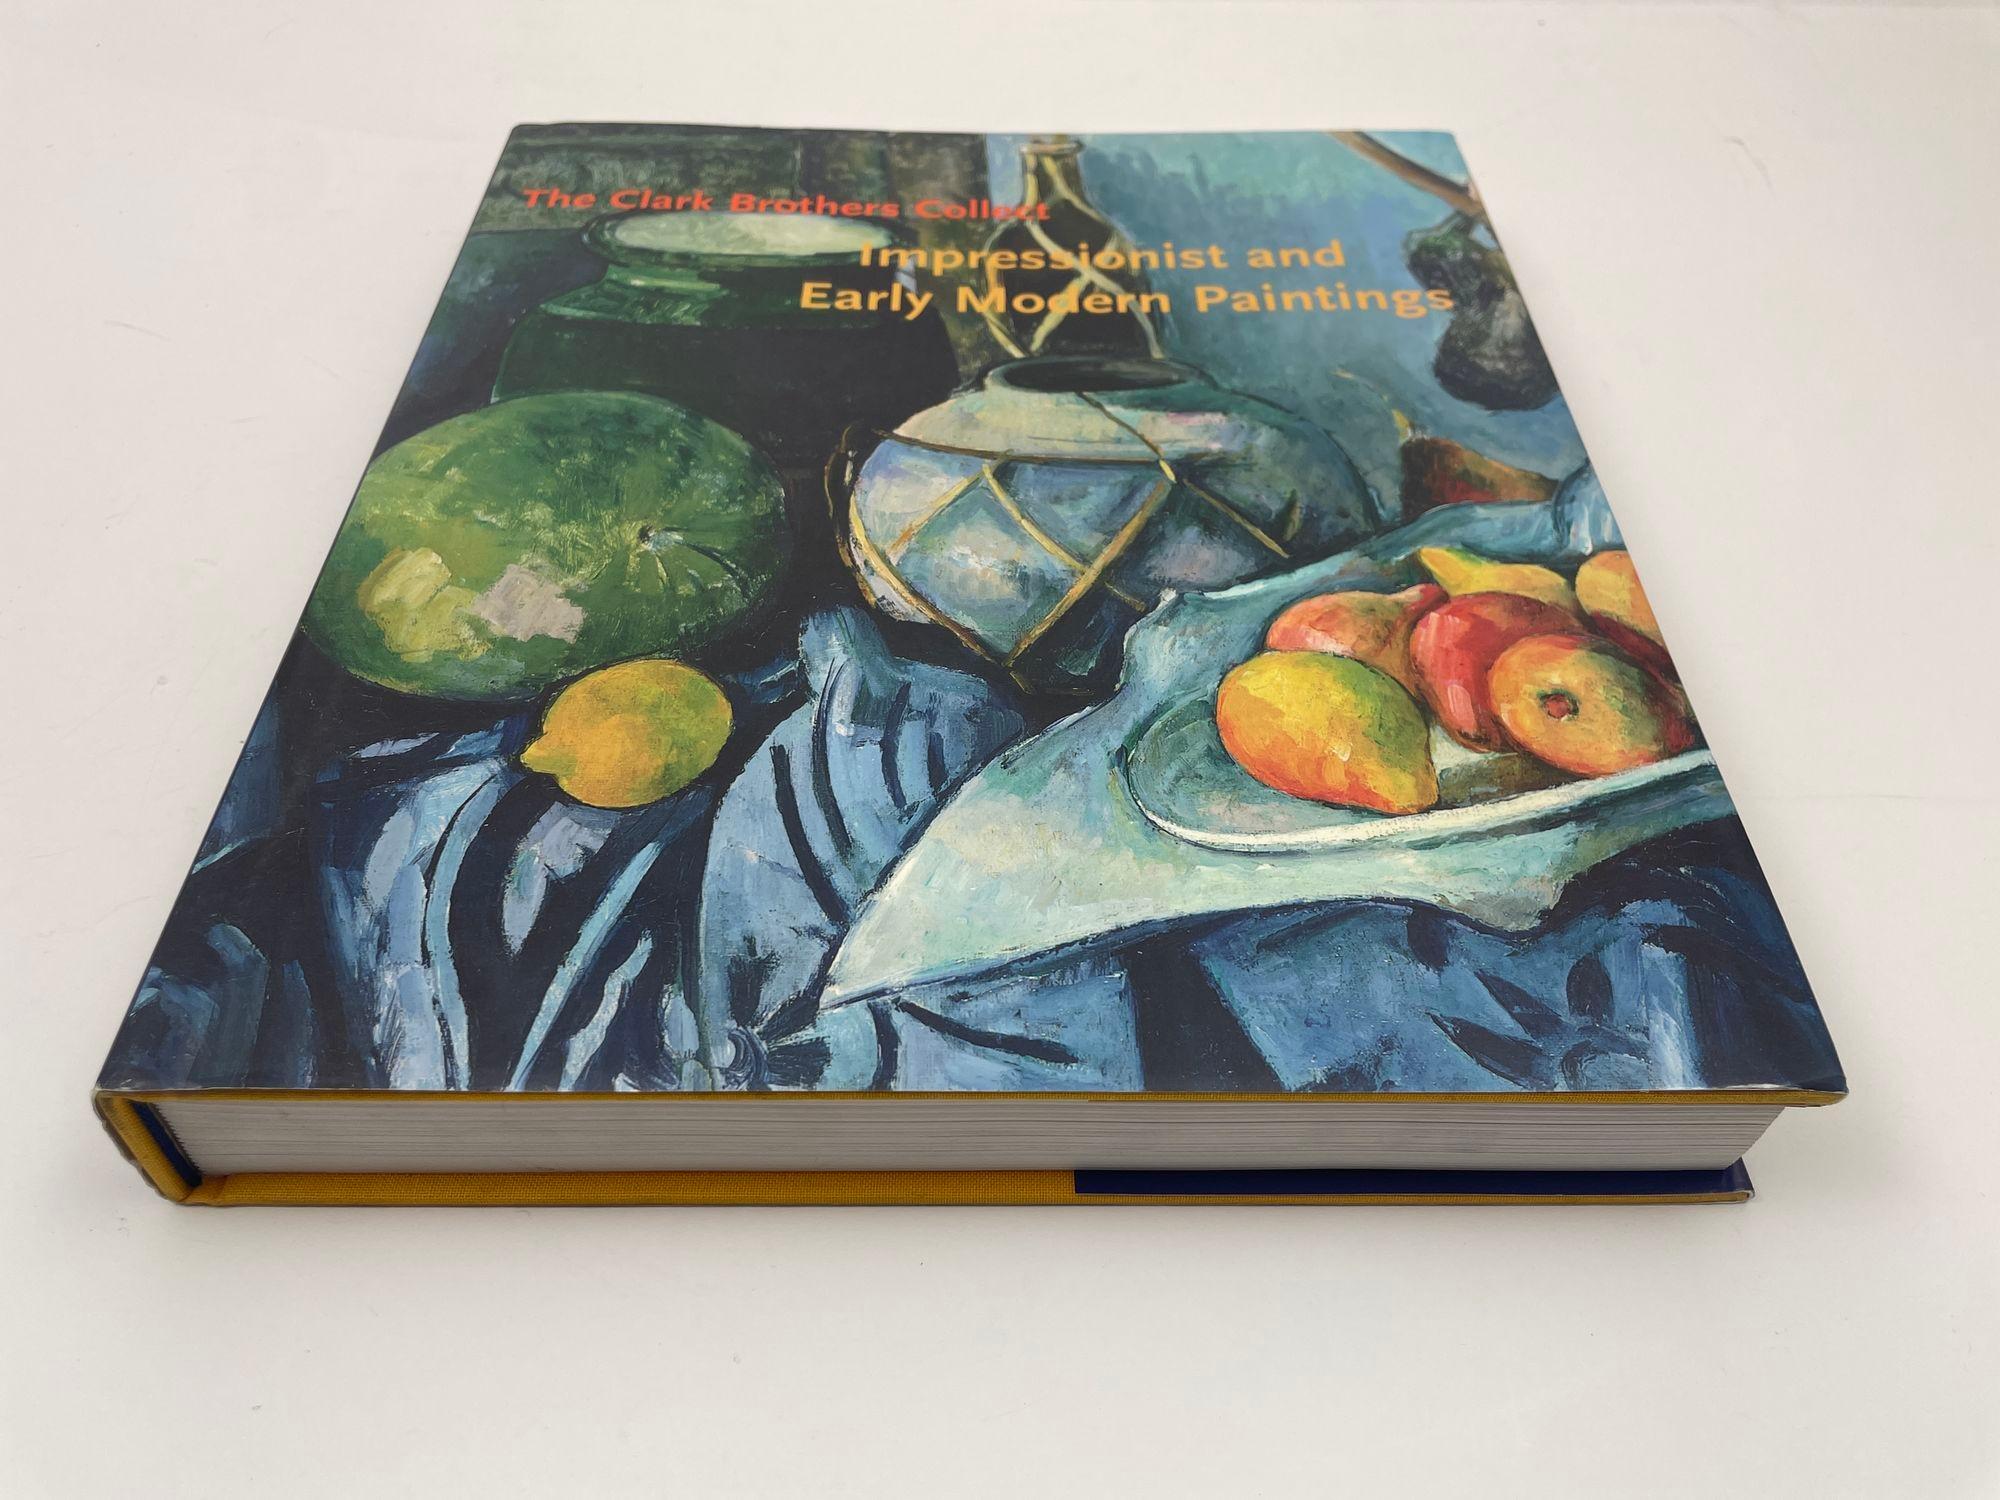 The Clark Brothers Collect Impressionists and Early Modern Painting Hardcover Coffee Table Book.
Michael Conforti, Sterling and Francine Clark Art Institute, Metropolitan Museum of Art (New York, N.Y.)
Sterling and Francine Clark Art Institute, 2006